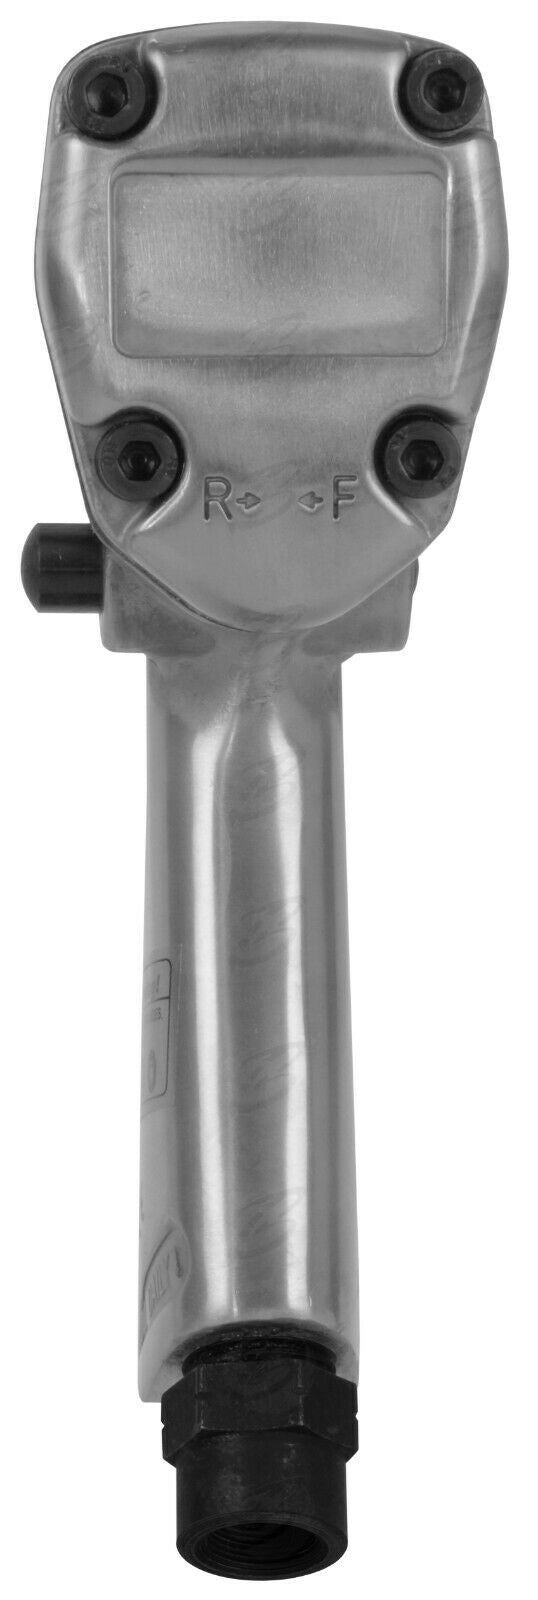 BERGEN 3/8" DRIVE AIR IMPACT WRENCH 176Nm